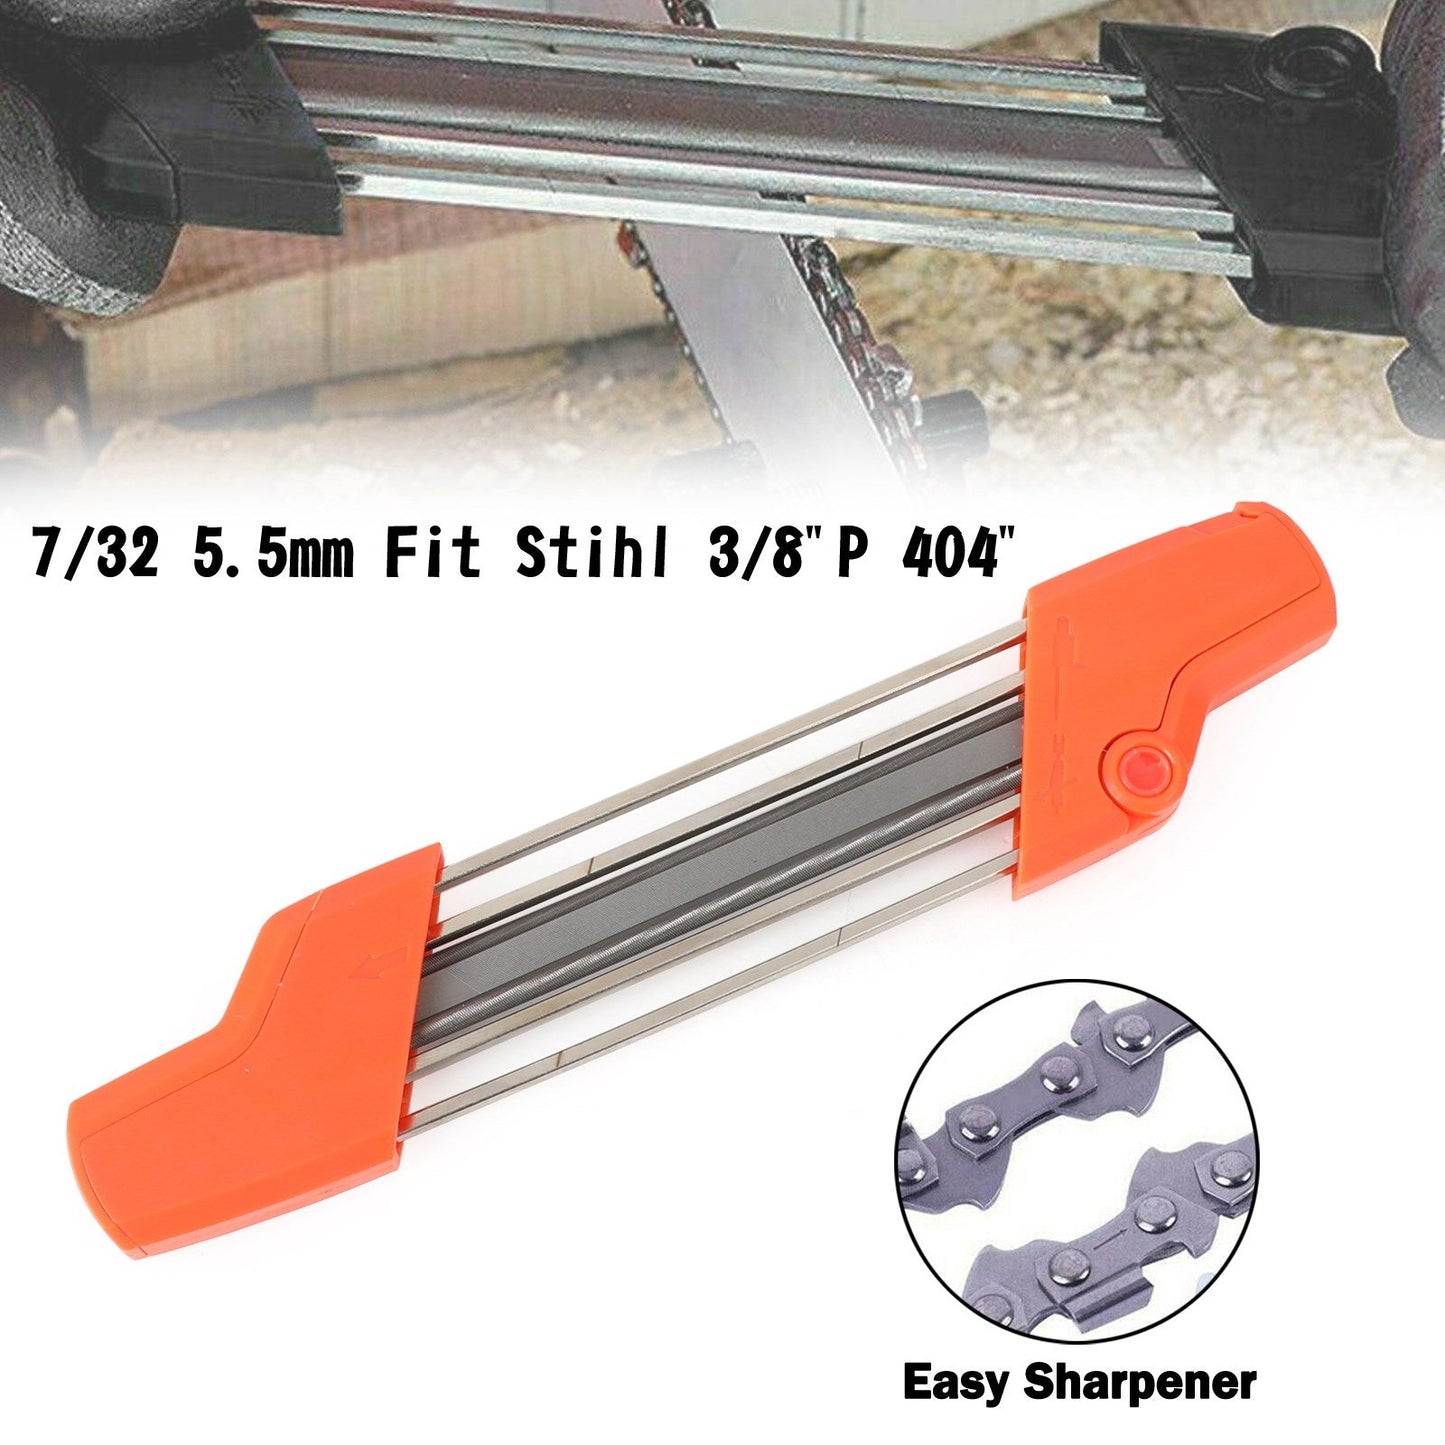 2 IN 1 Easy Chainsaw File Chain Sharpener Kits 7/32 5.5mm Fit Stihl 3/8"P 404"